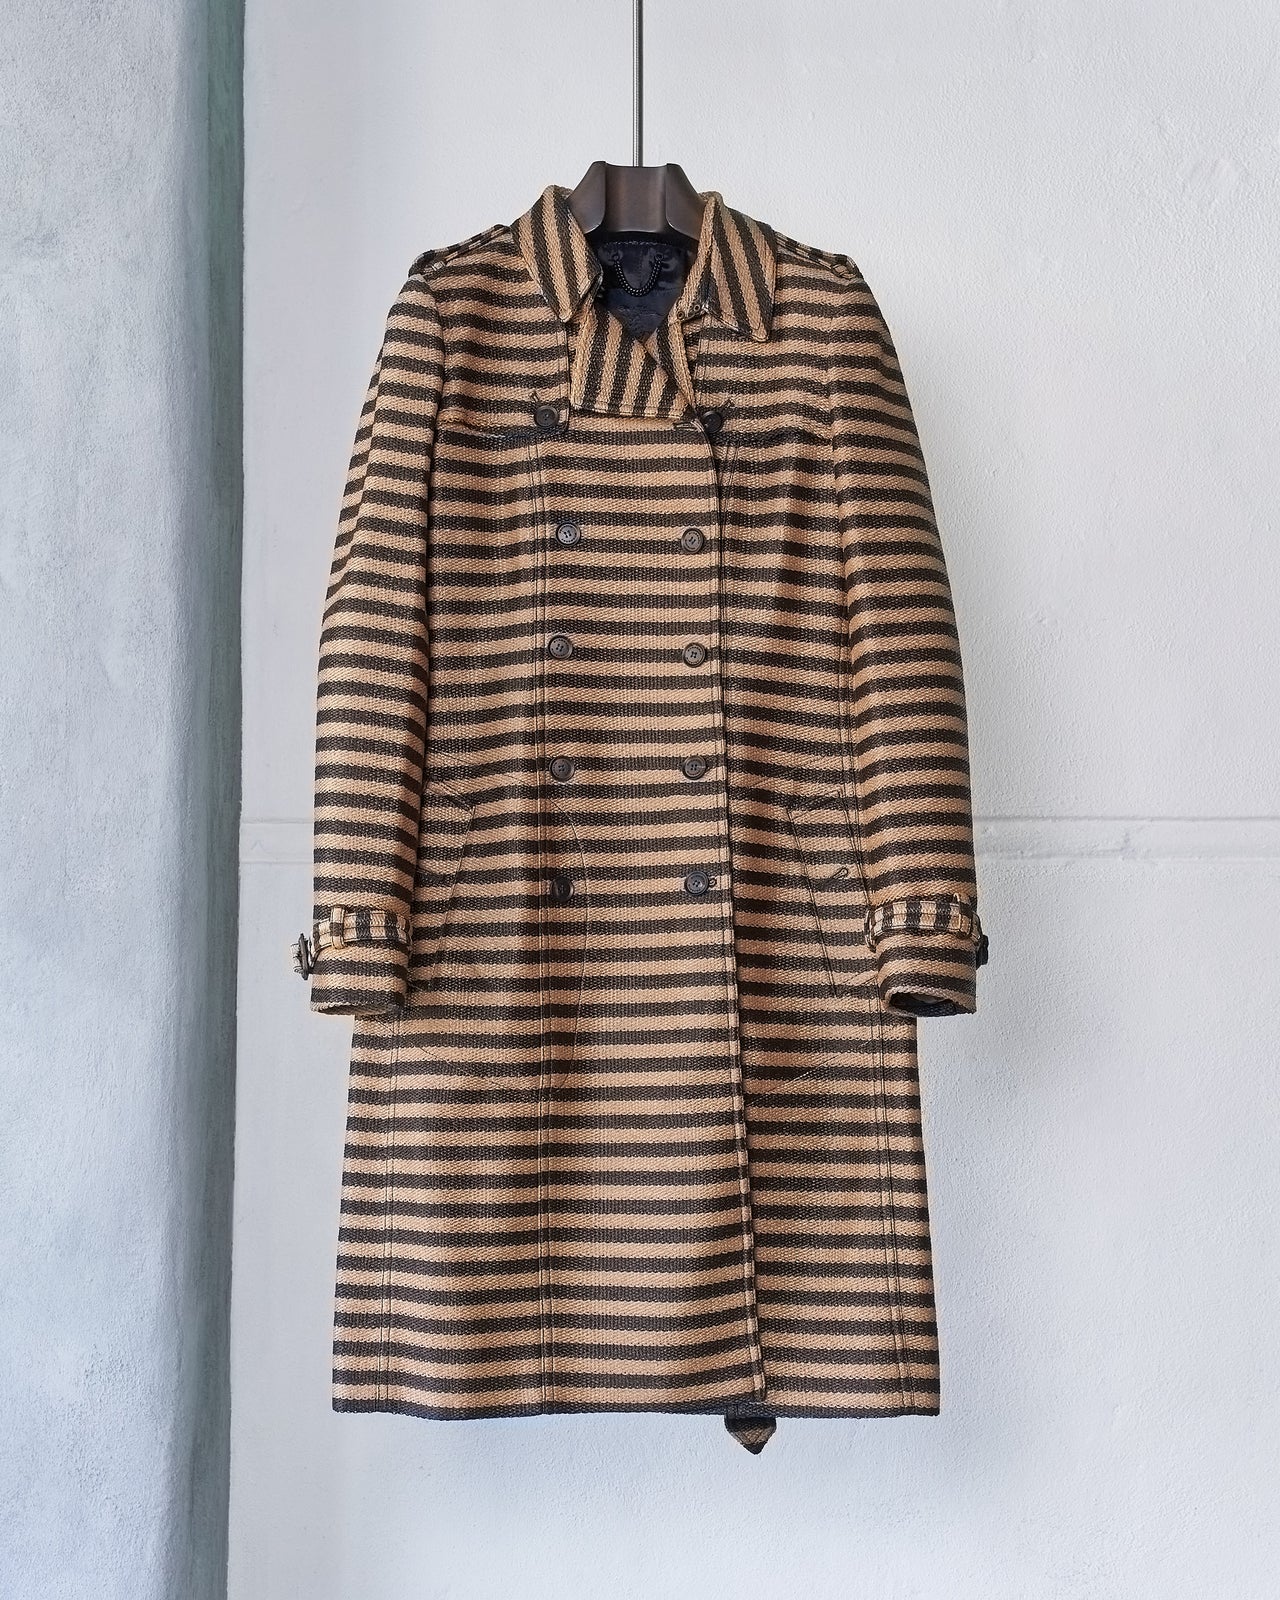 Burberry Christopher Bailey 2017 Striped Raffia-weave Trench Coat